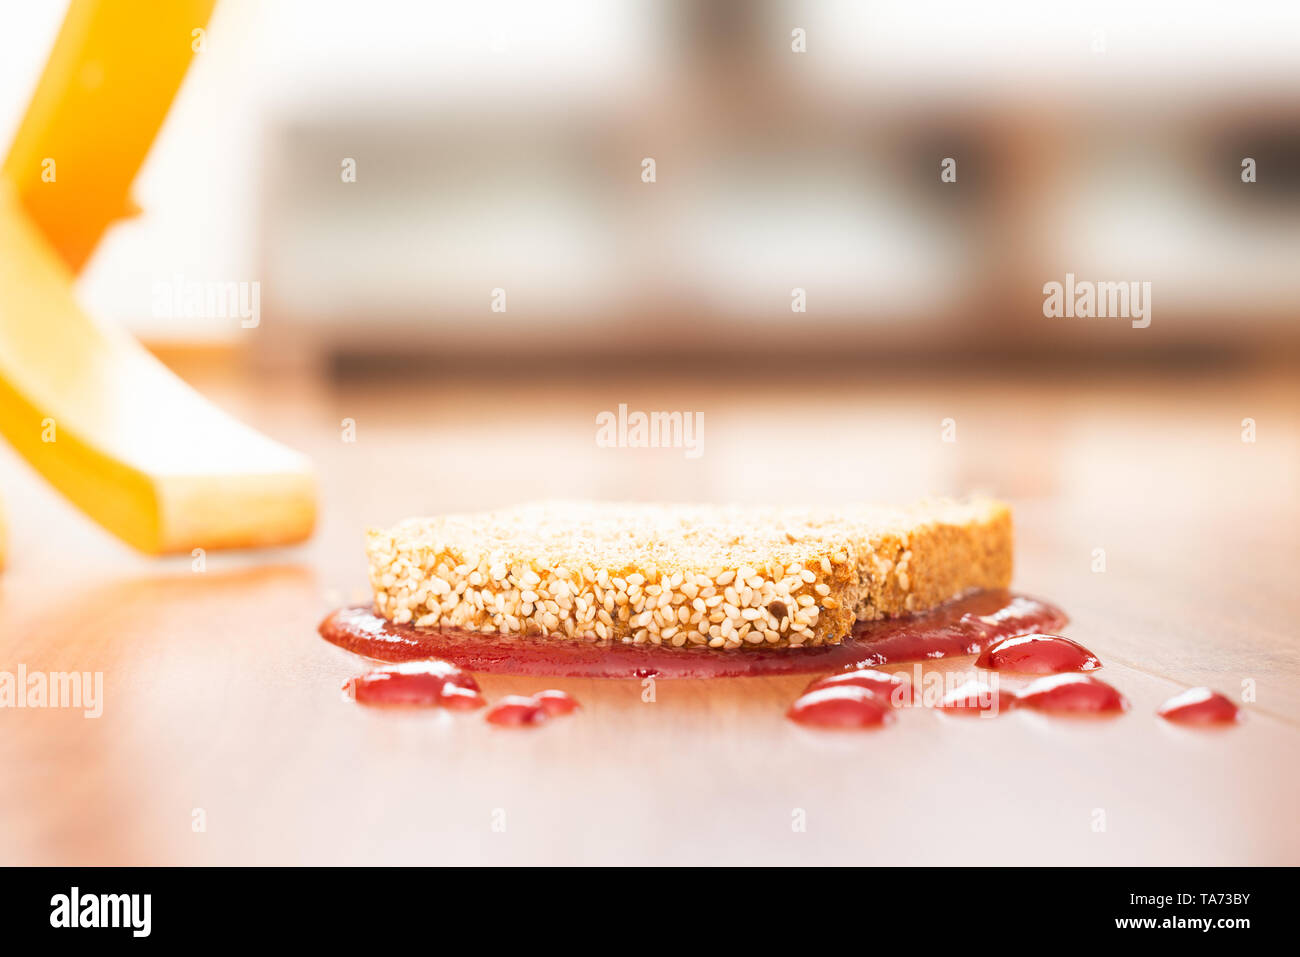 Concept representation of Murphy’s law with a slice of bread fallen upside down Stock Photo